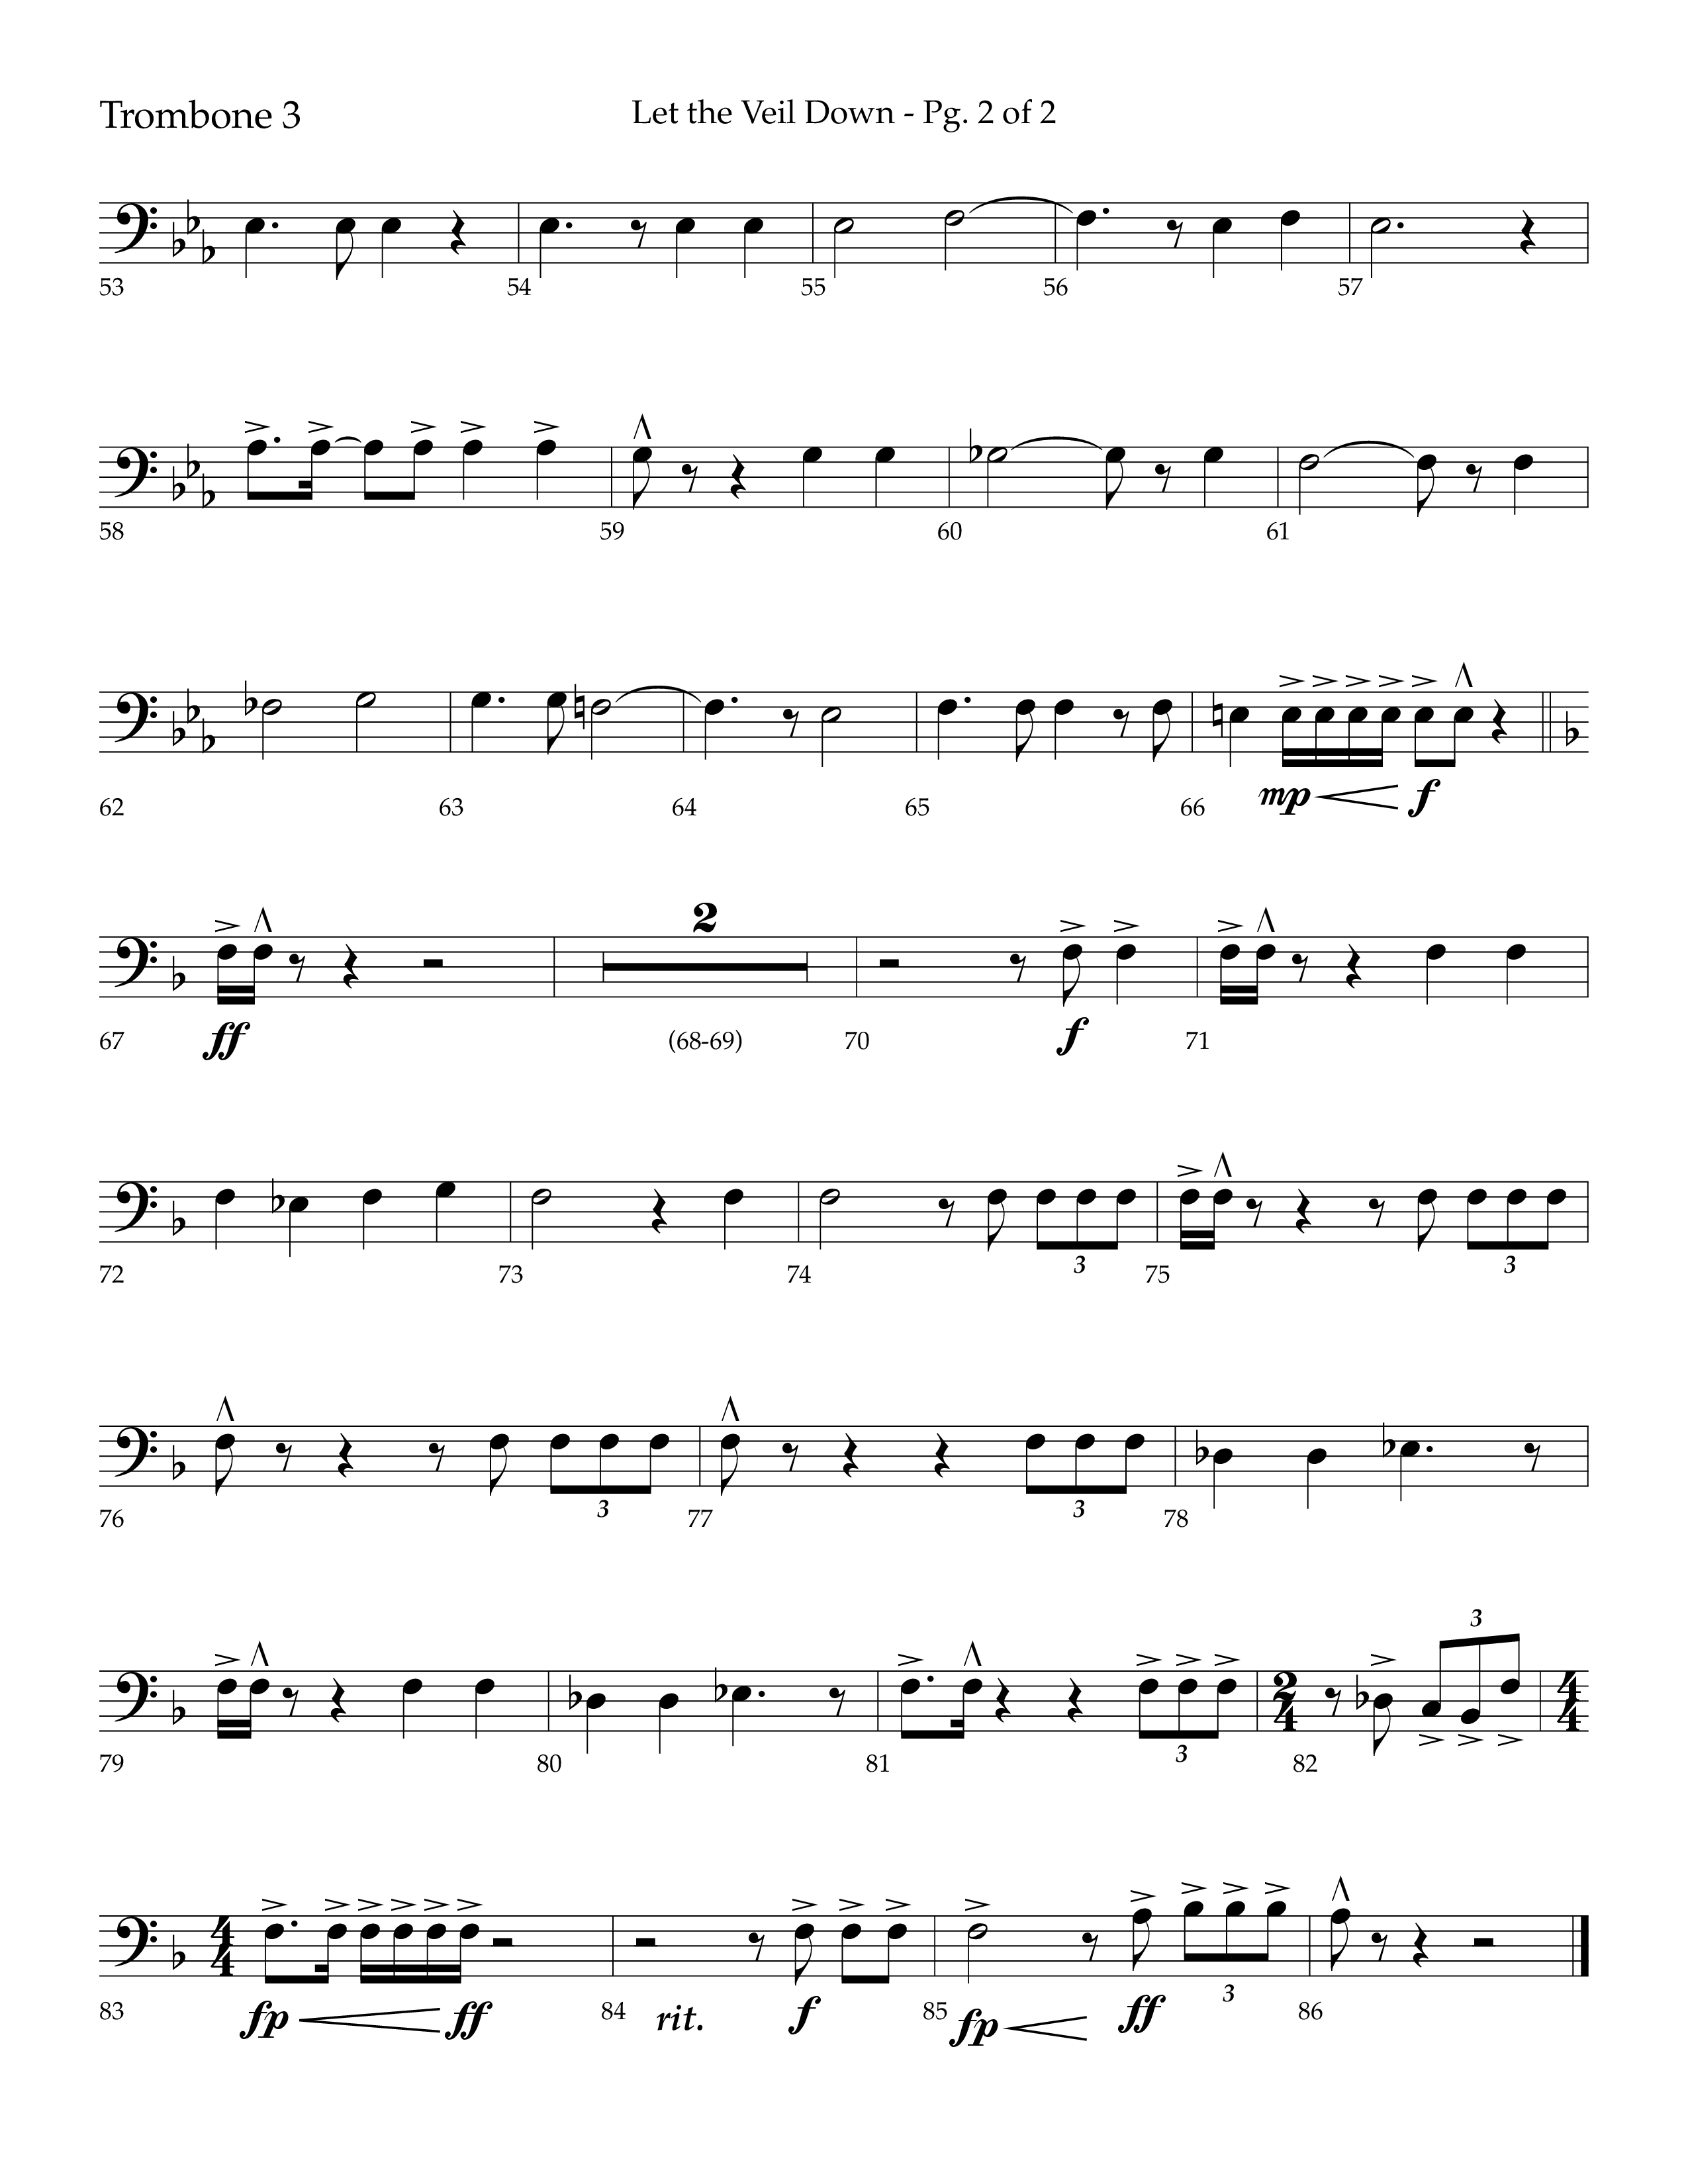 Let The Veil Down with I Exalt Thee (Choral Anthem SATB) Trombone 3 (Lifeway Choral / Arr. Cody McVey)